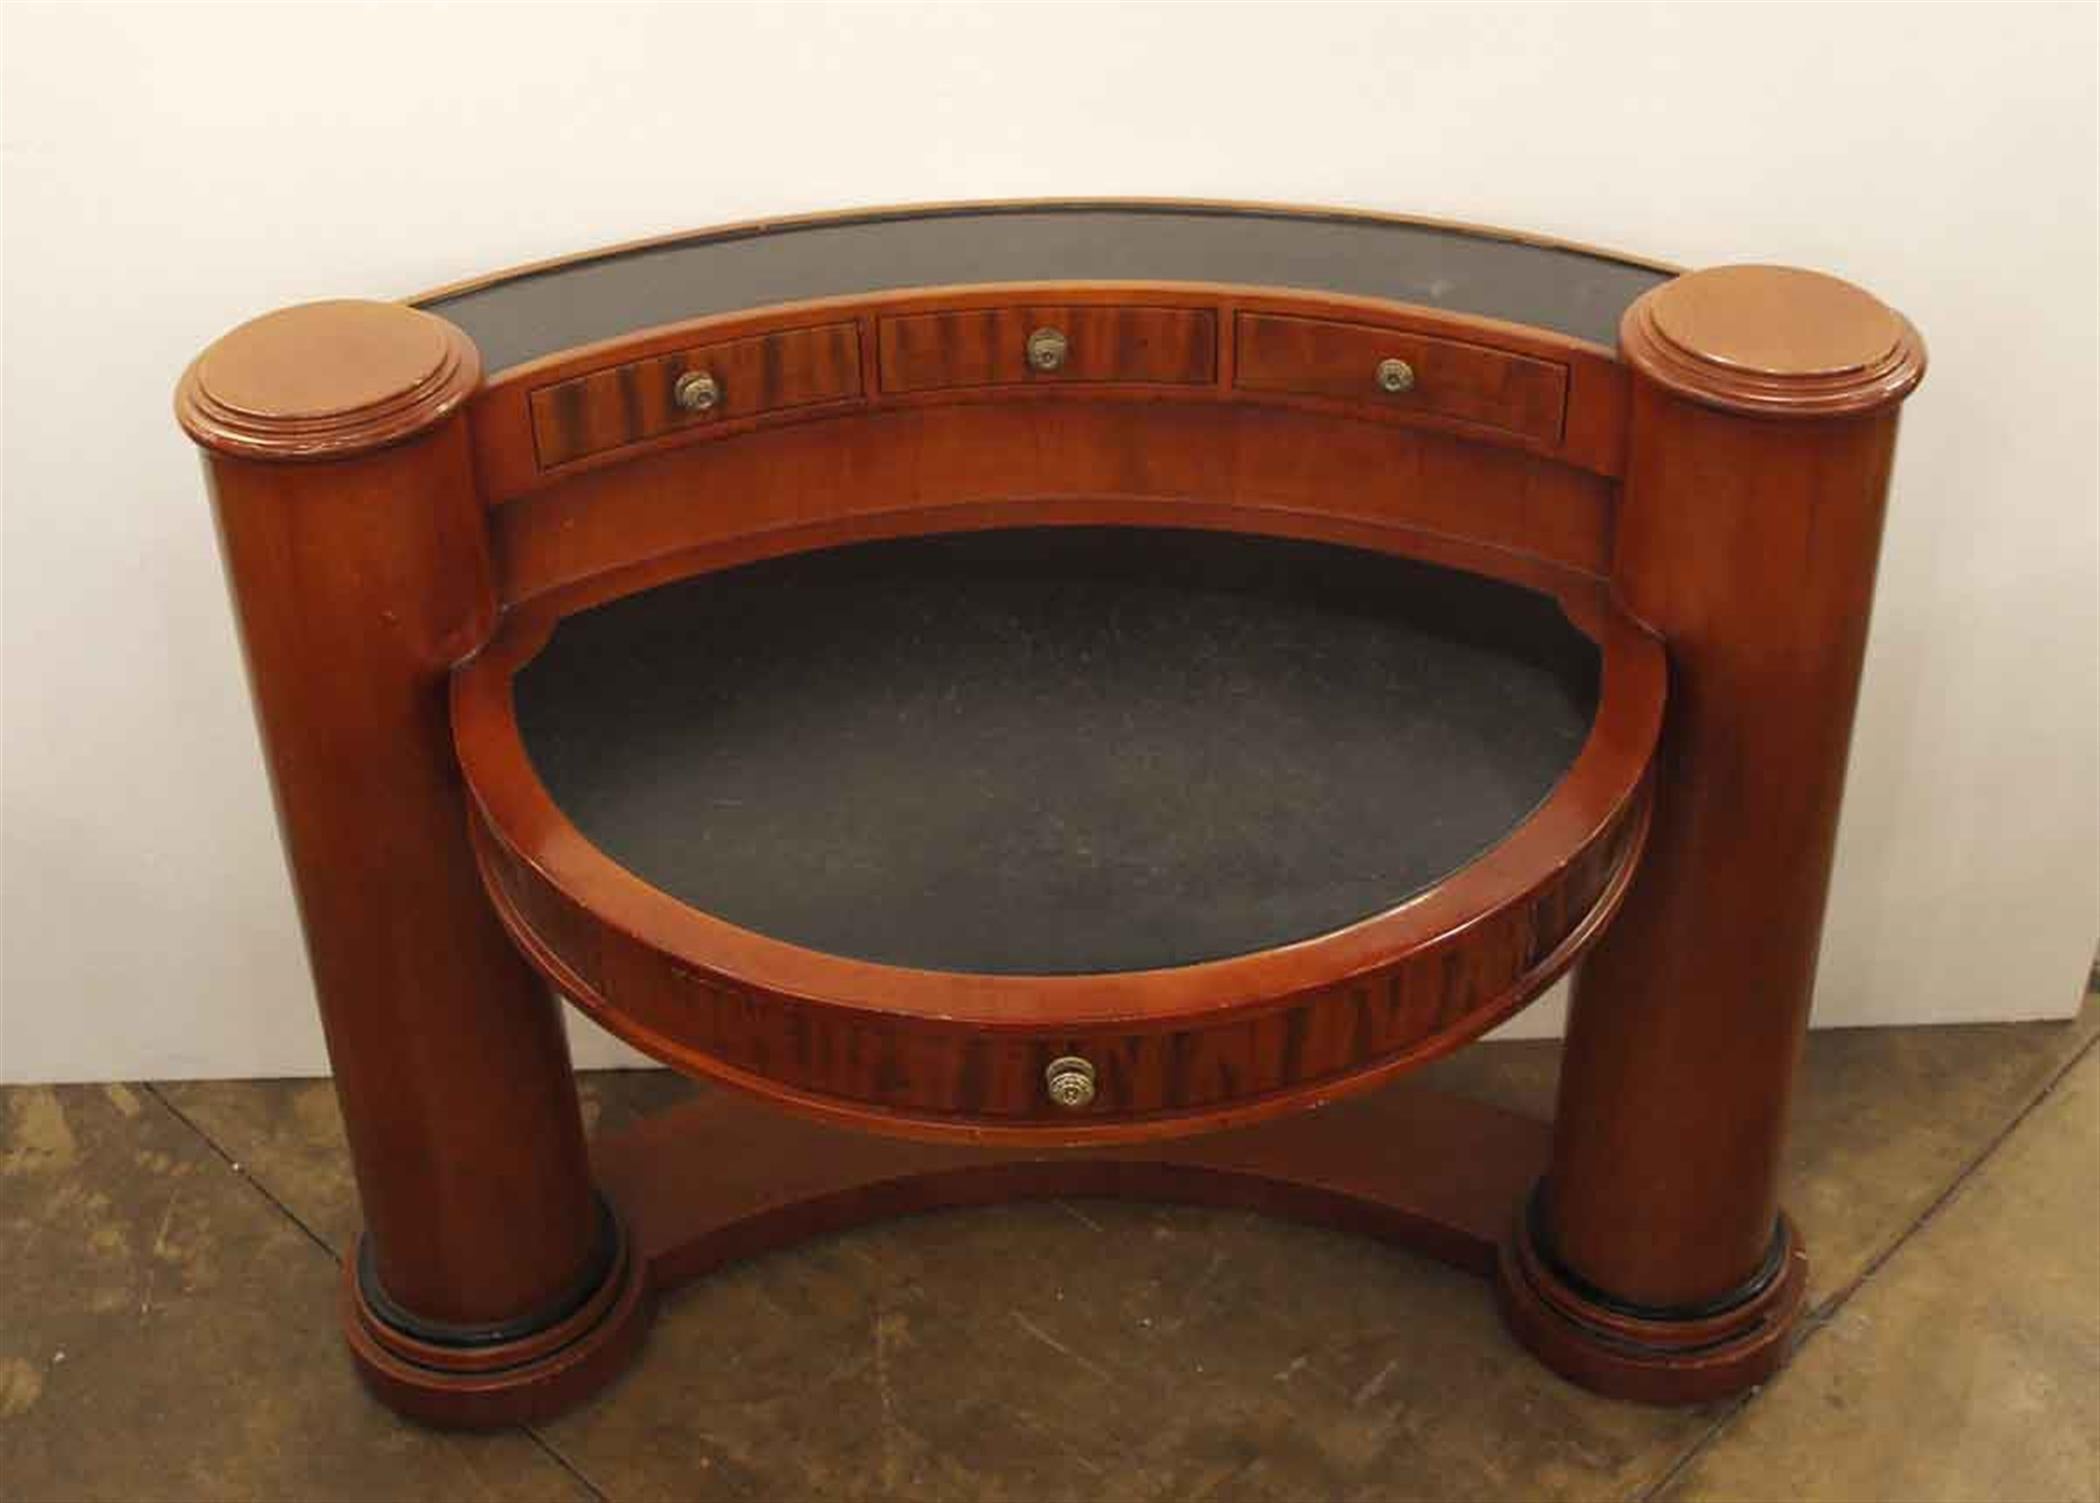 1980s Half Circle Wood Desk with Pillars & Leather Top by Enrique Garcel im Zustand „Gut“ in New York, NY